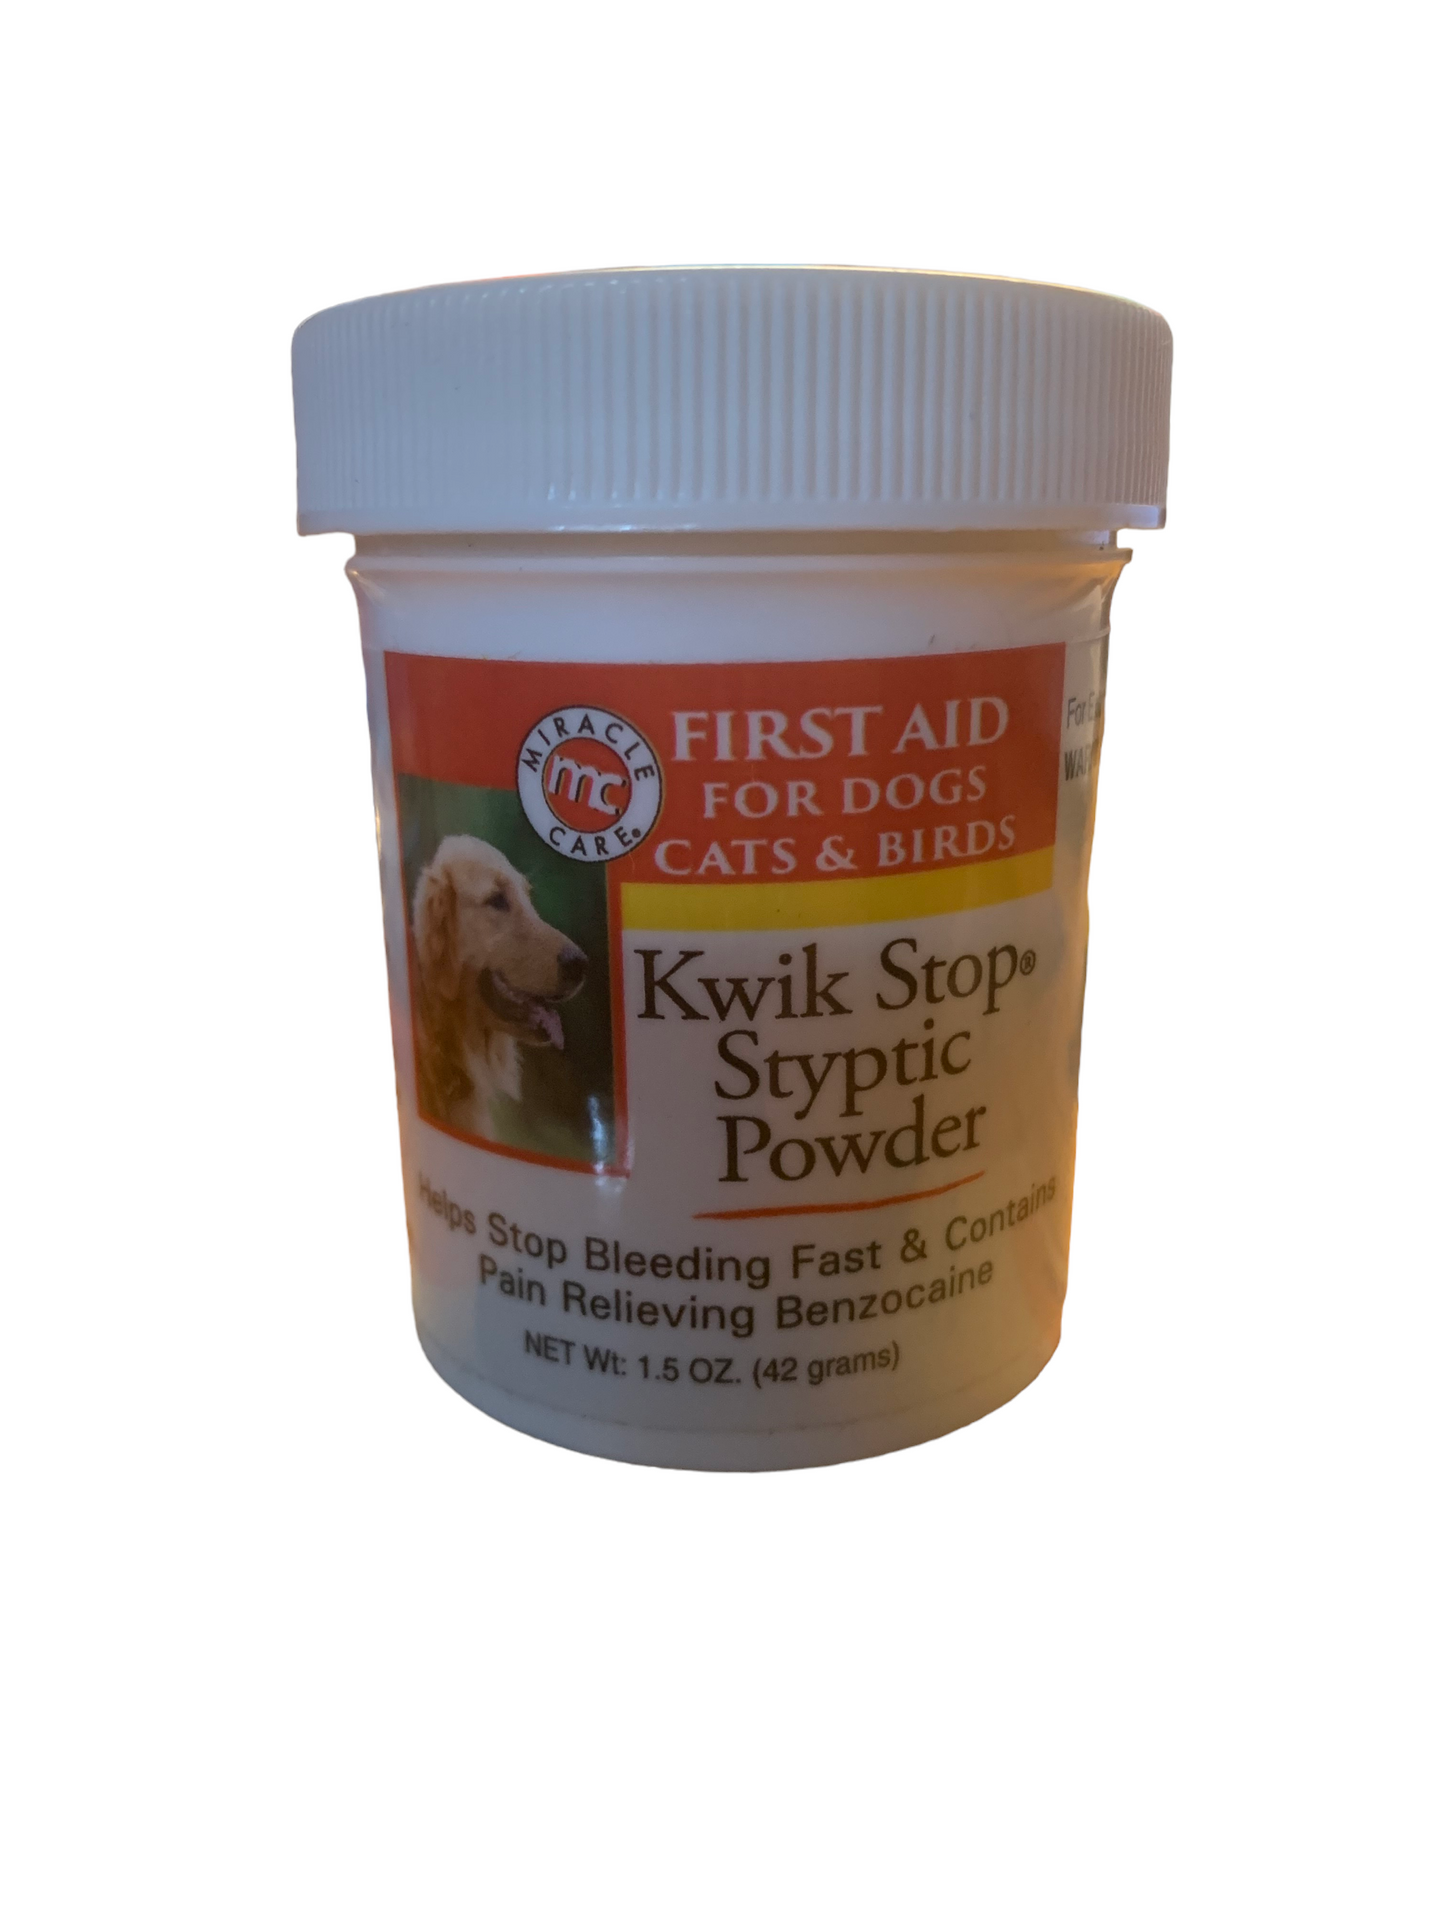 styptic-powder-for-dogs-cats-birds